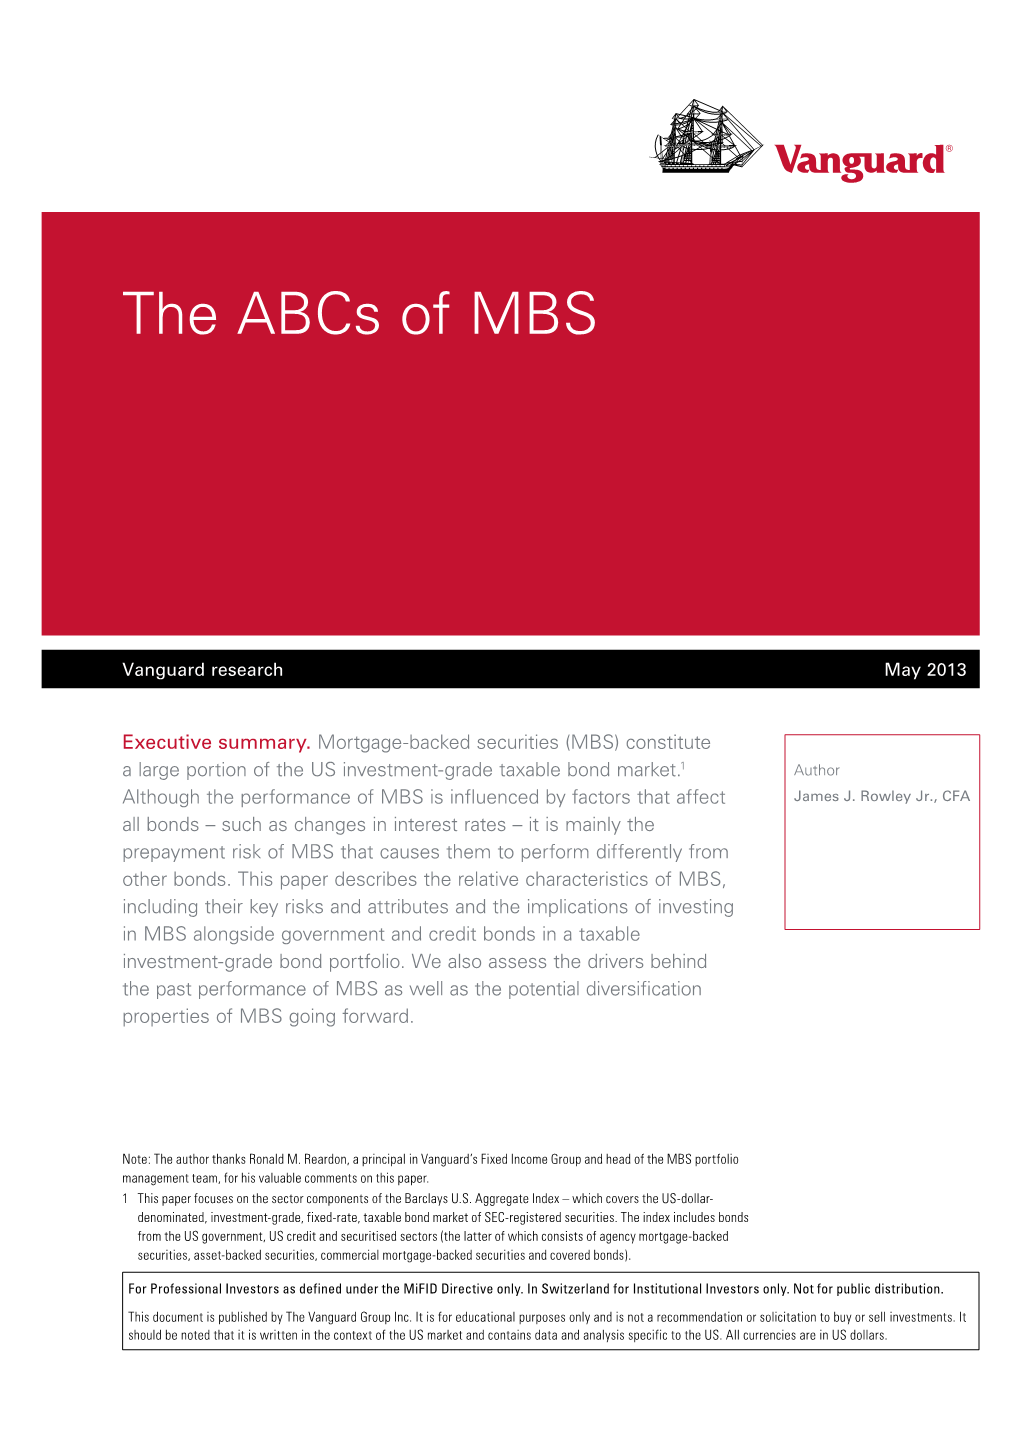 The Abcs of MBS